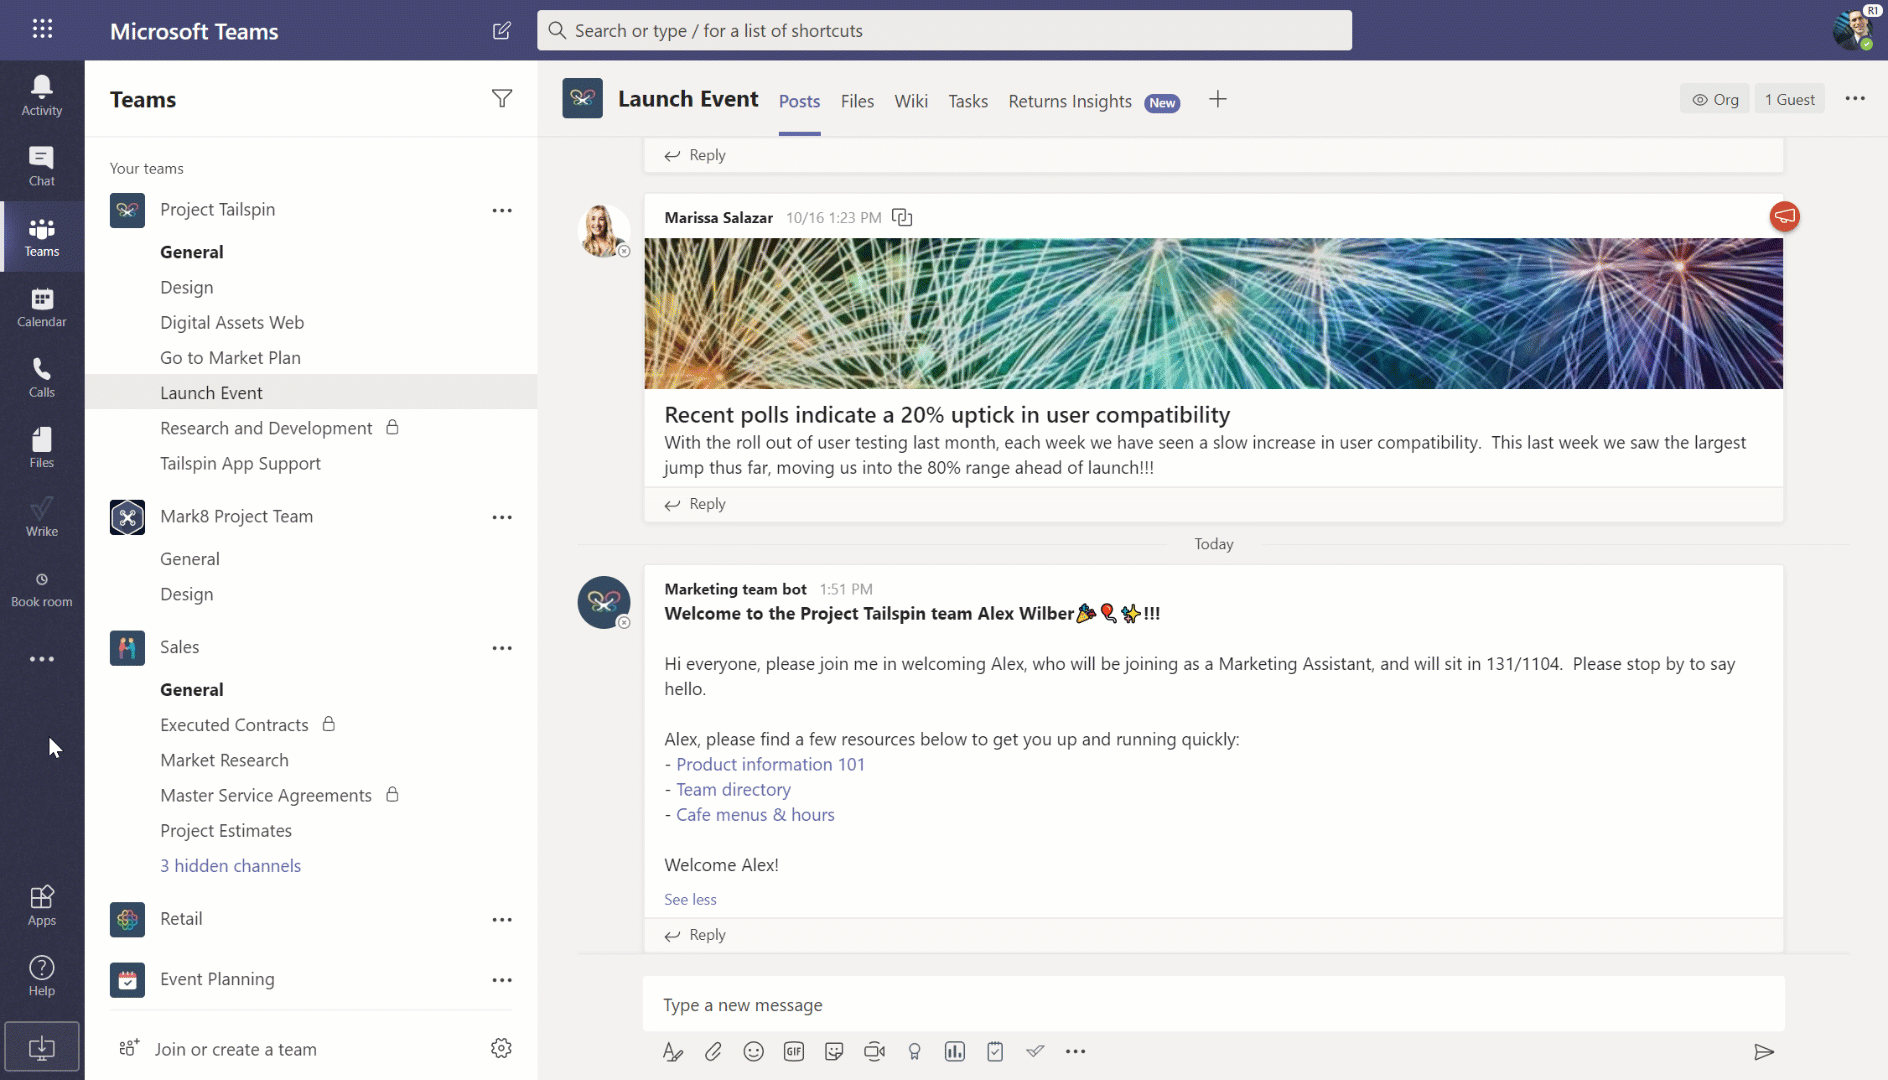 GIF of Microsoft teams pin features